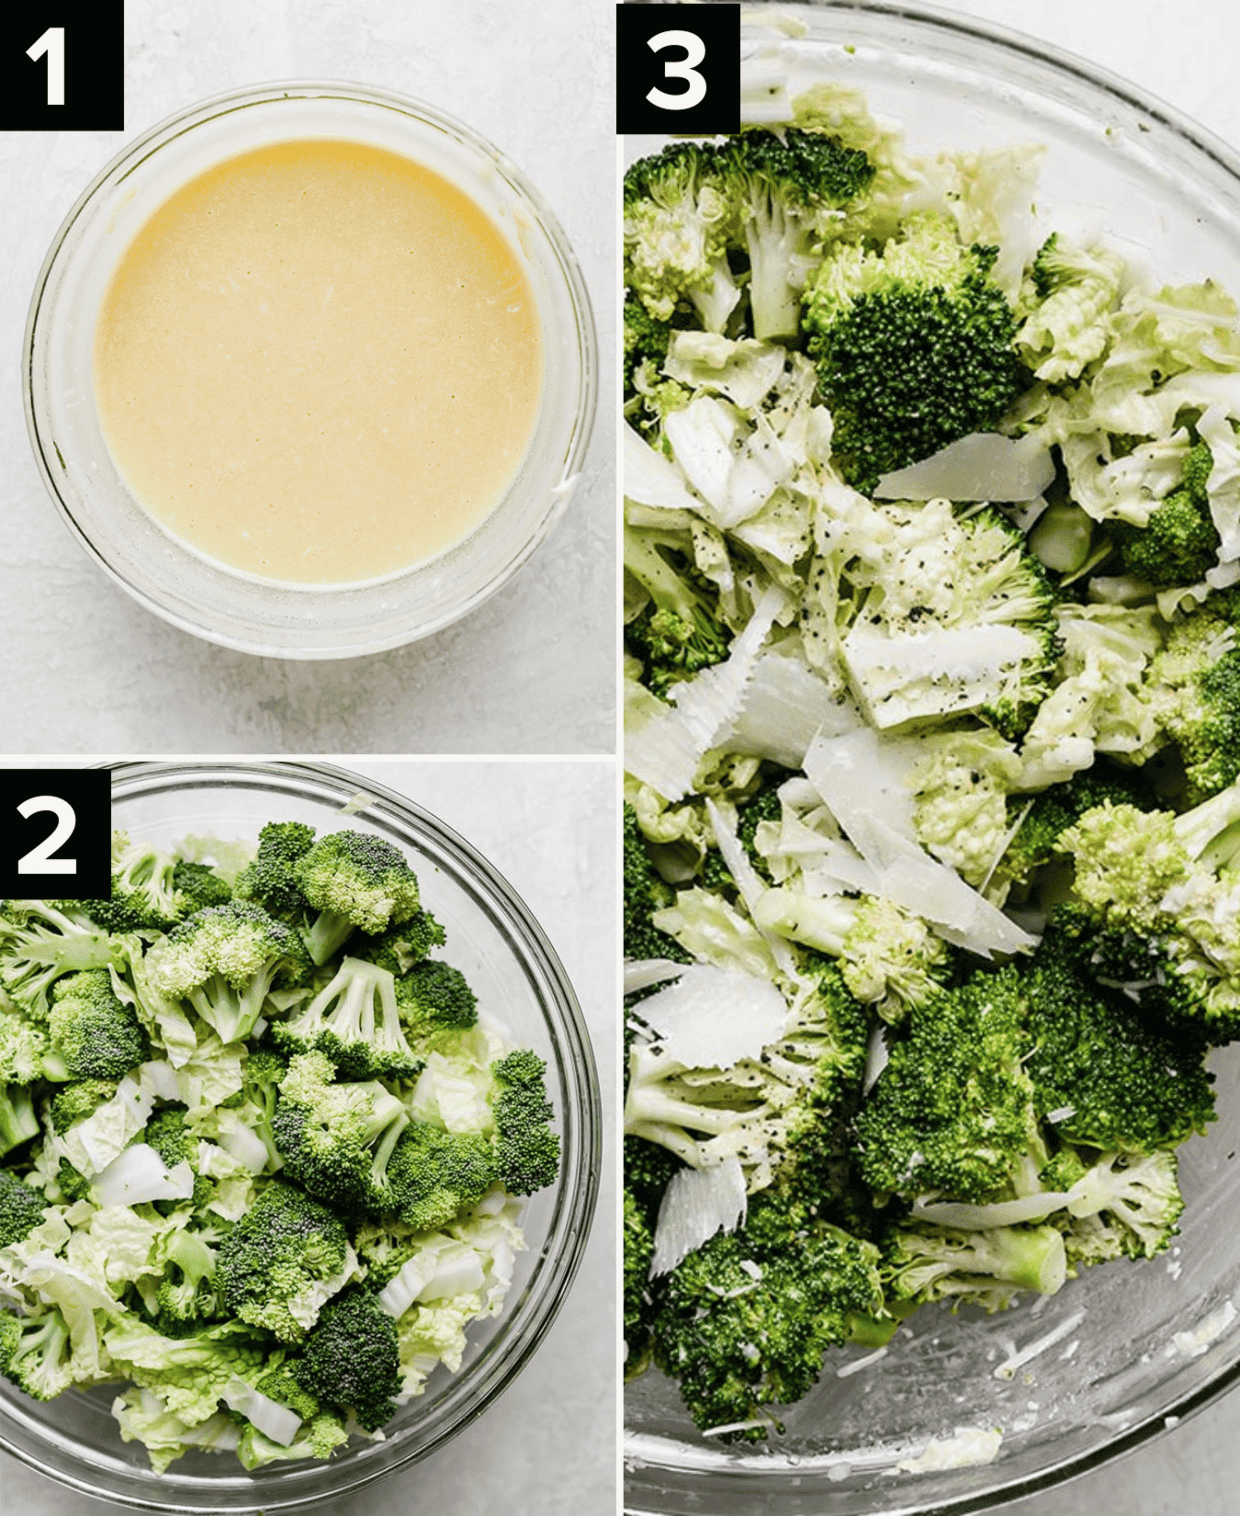 Three images showing a homemade caesar dressing that's pale yellow color in a glass bowl, then a bowl with broccoli and shaved cabbage, and another bowl with mixed Broccoli Caesar Salad in it.